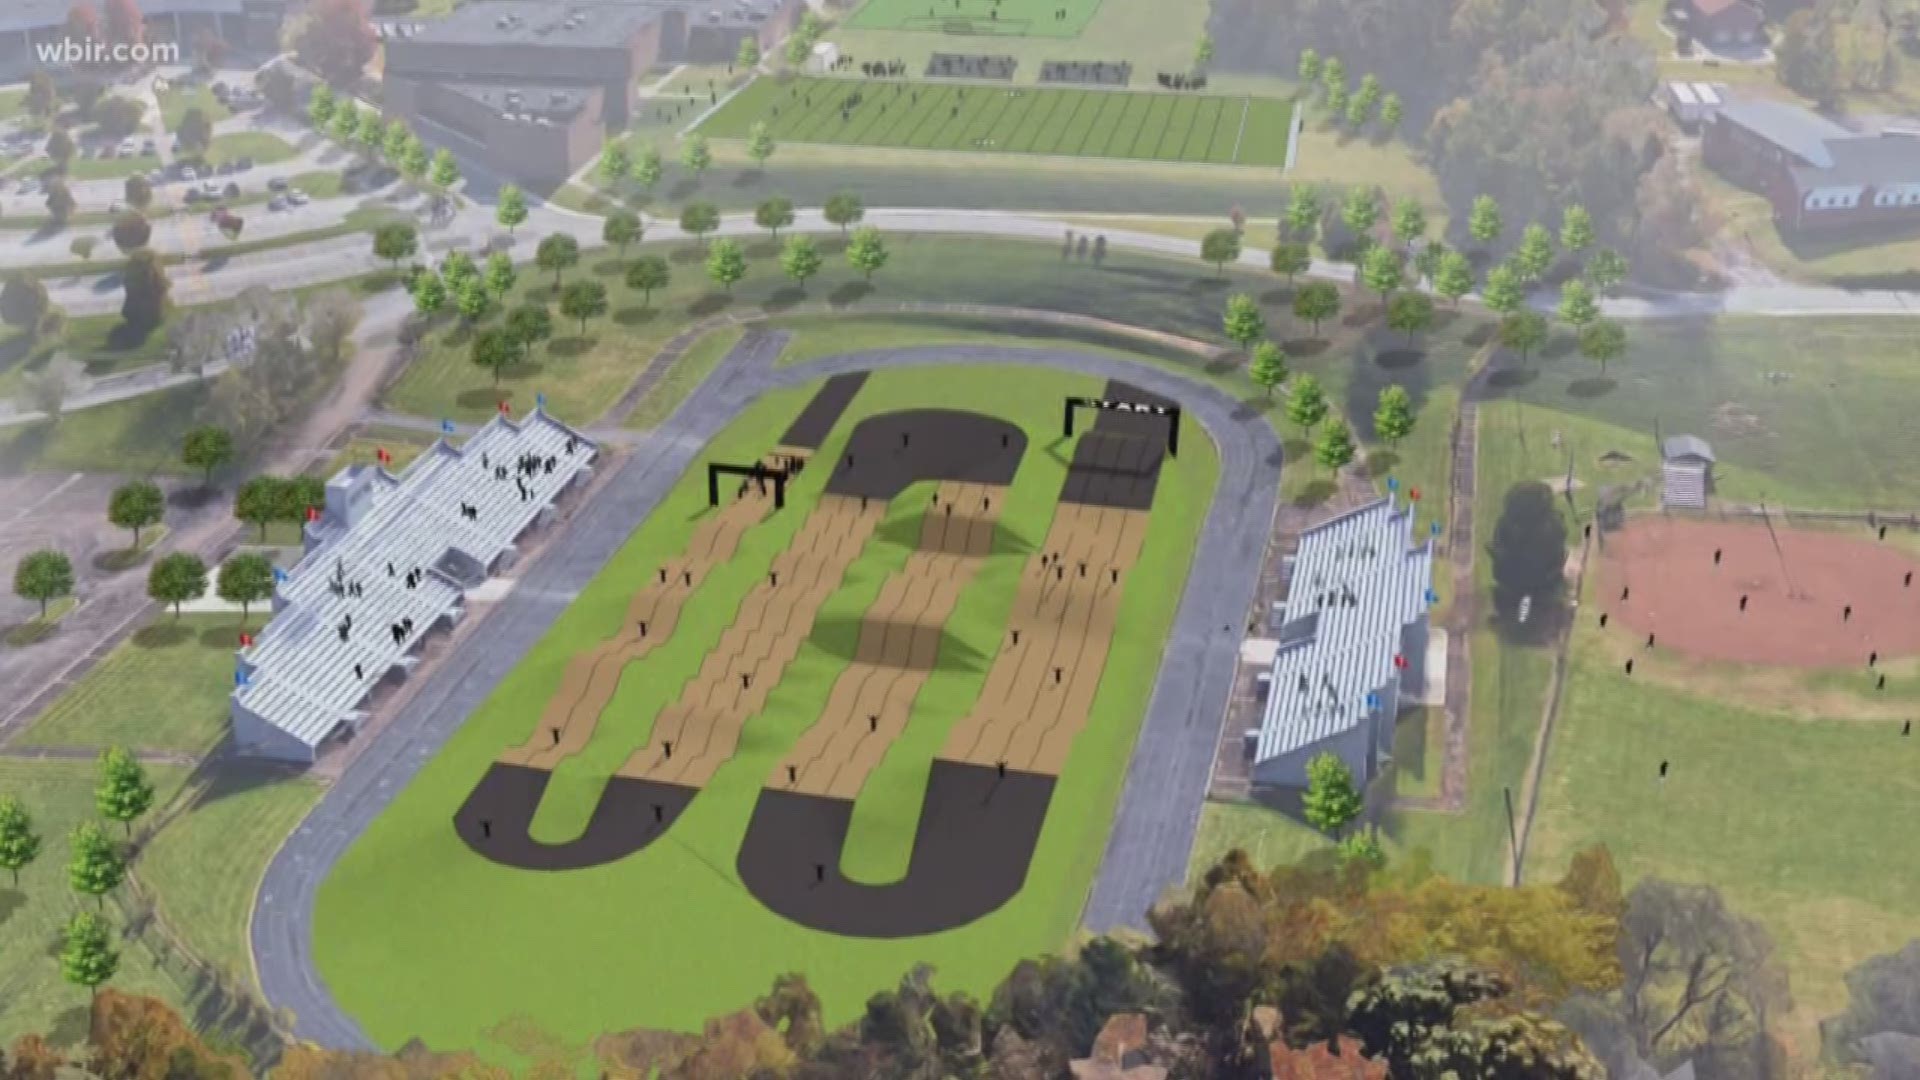 The plan to build a BMX track at South Doyle Middle School is on hold.